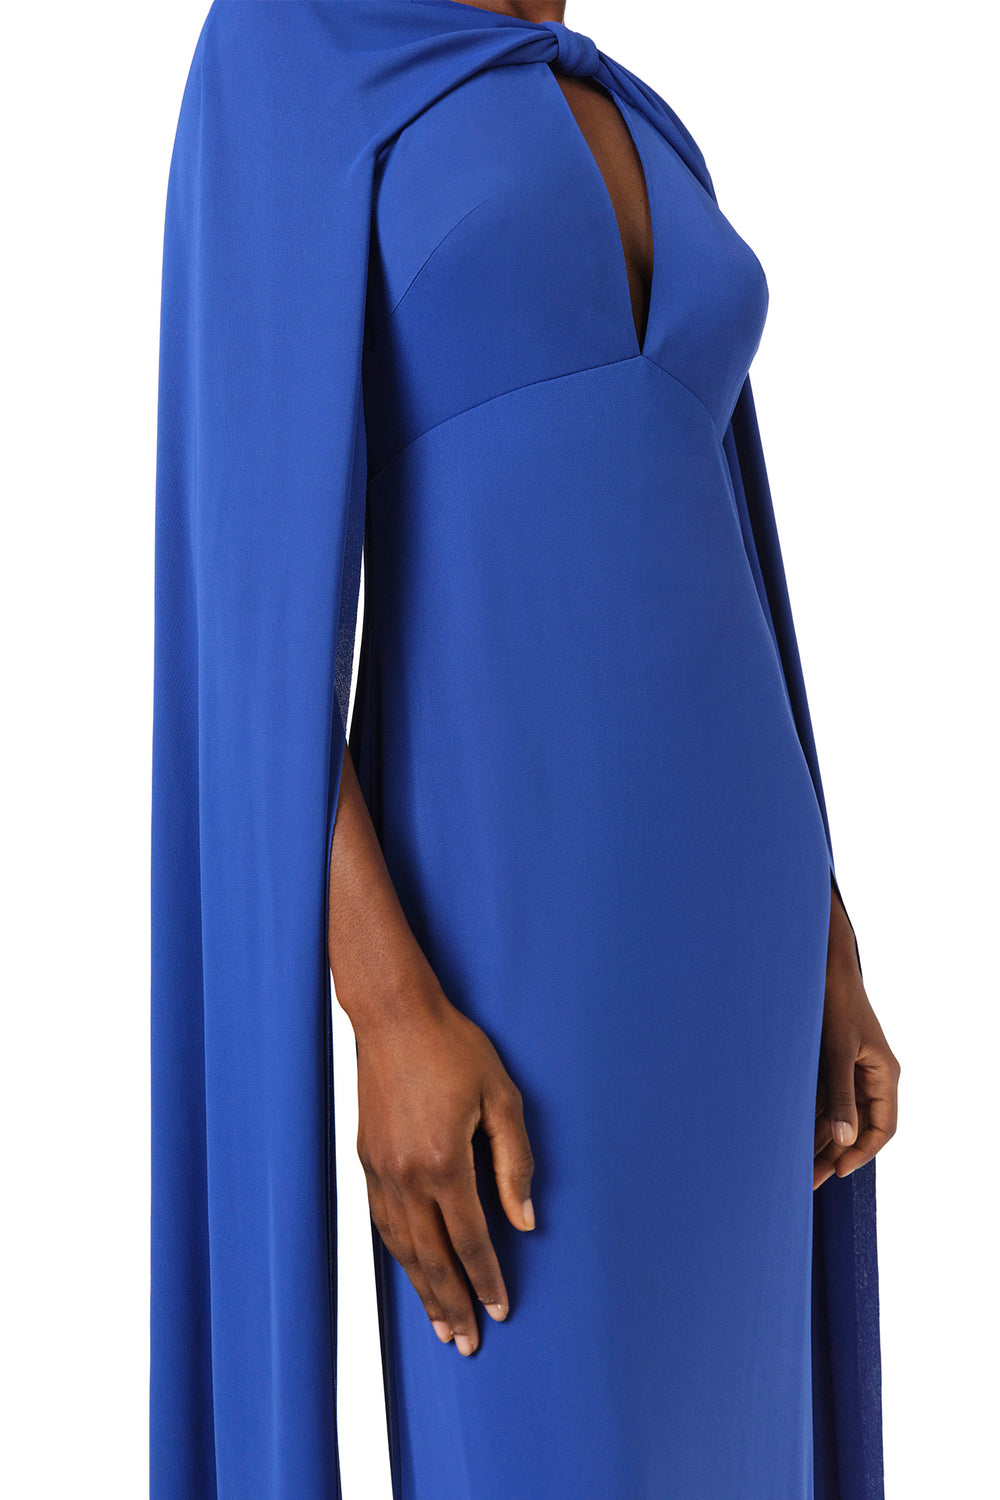 Monique Lhuillier Spring 2024 royal blue crepe-back satin gown with attached cape and keyhole bodice - right detail.